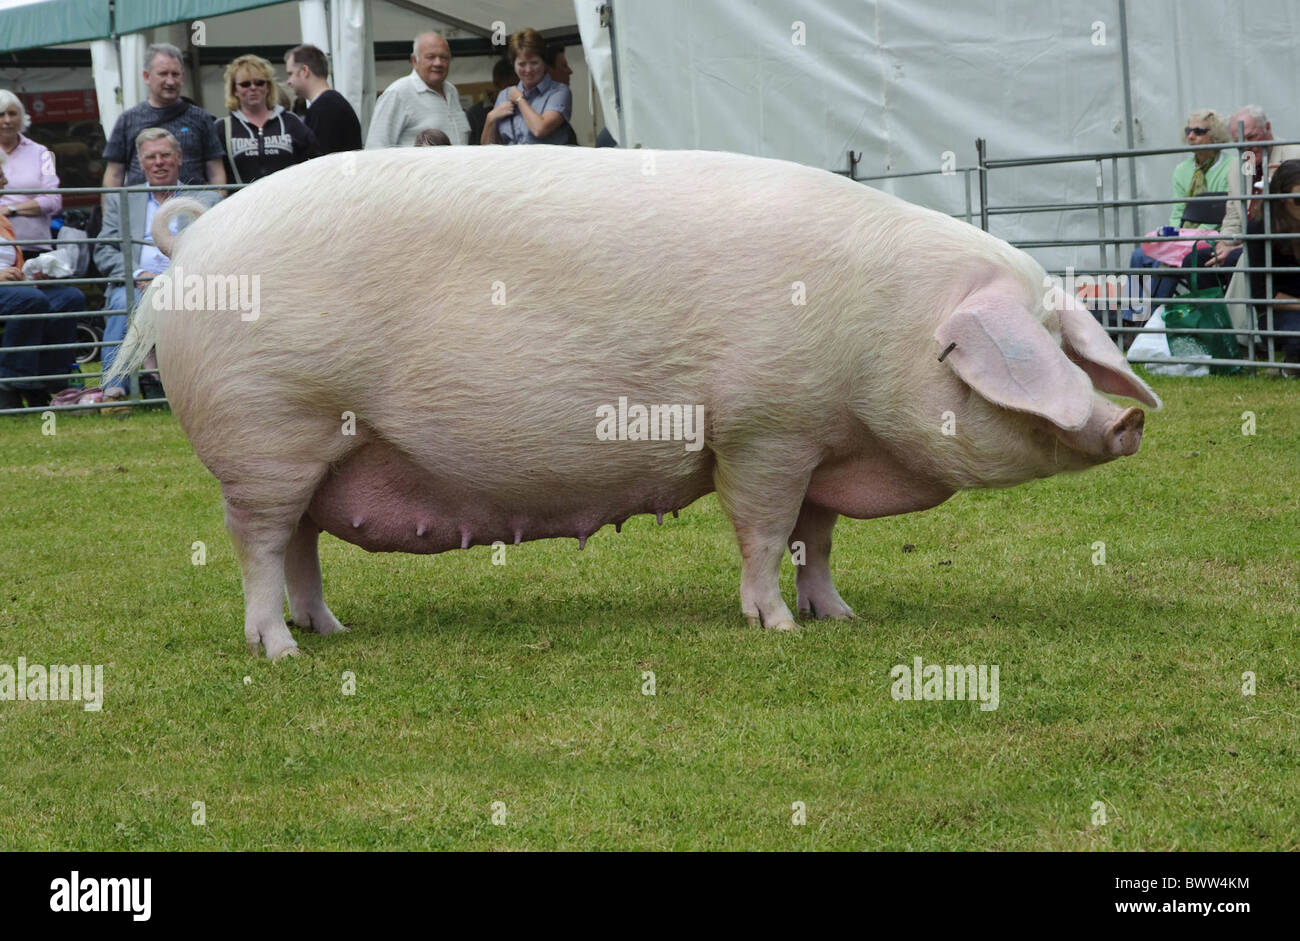 British pig stock photography and - Alamy